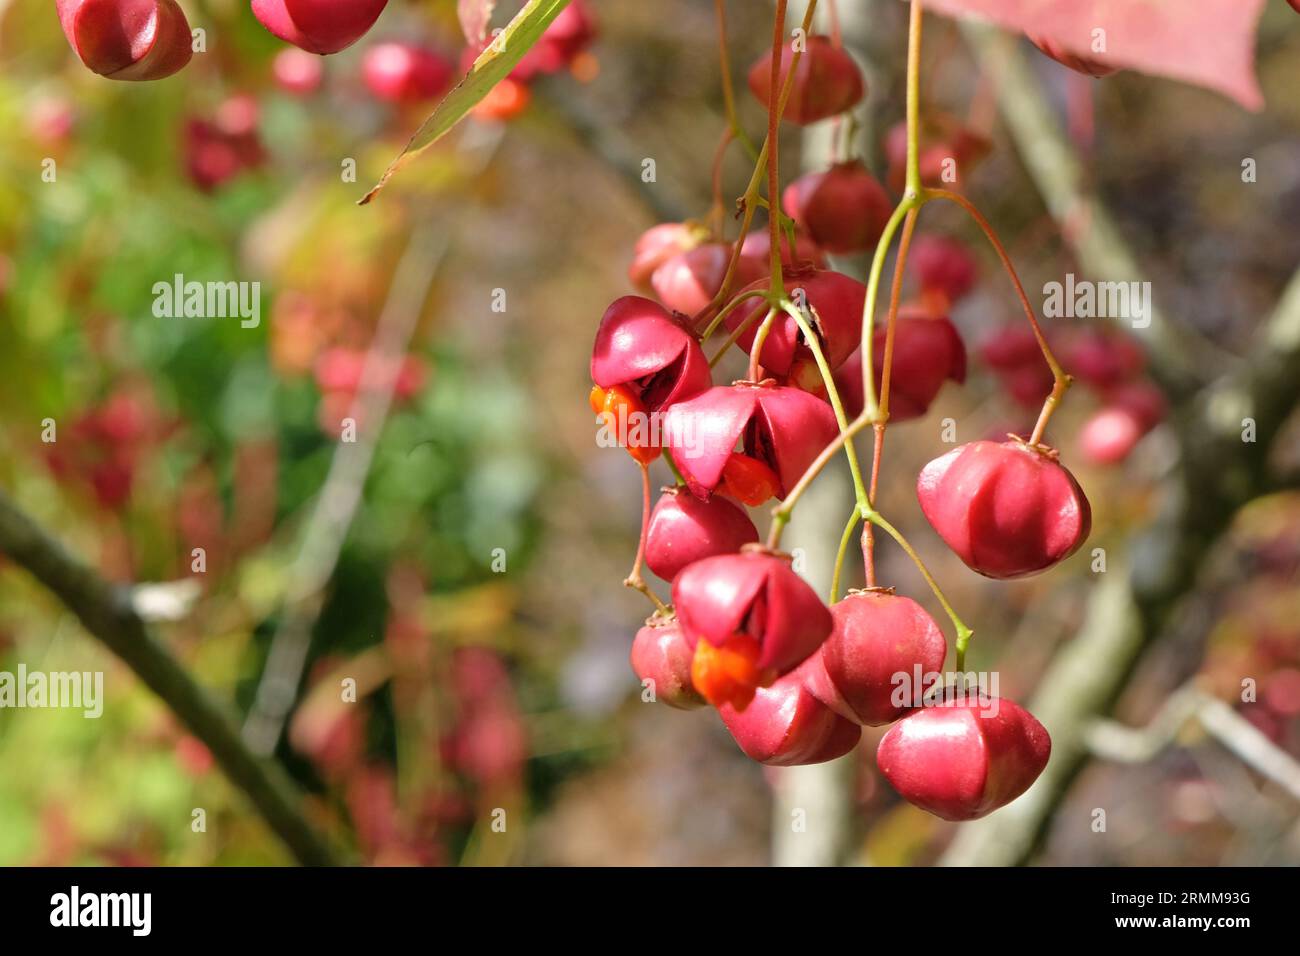 The red fruit of the Euonymus planipes, or a spindle tree. Stock Photo